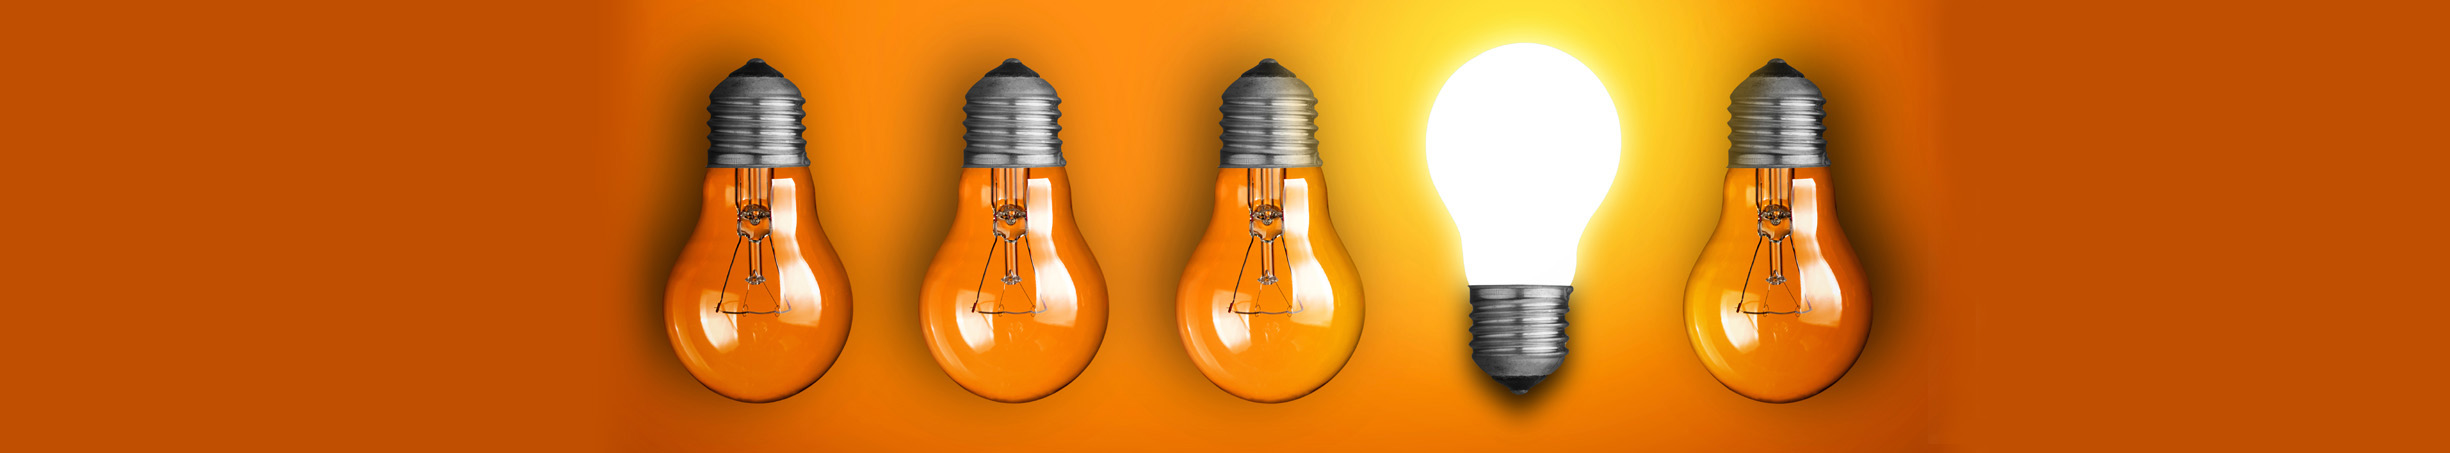 Five light bulbs are in a row on an orange background. The fourth light bulb in the row stands out from the others because it is facing upwards and is lit up, where as the others are all facing down and are not lit up. This symbolises the way that Security Alarm Monitoring stand out from the other business that provide wholesale alarm monitoring.